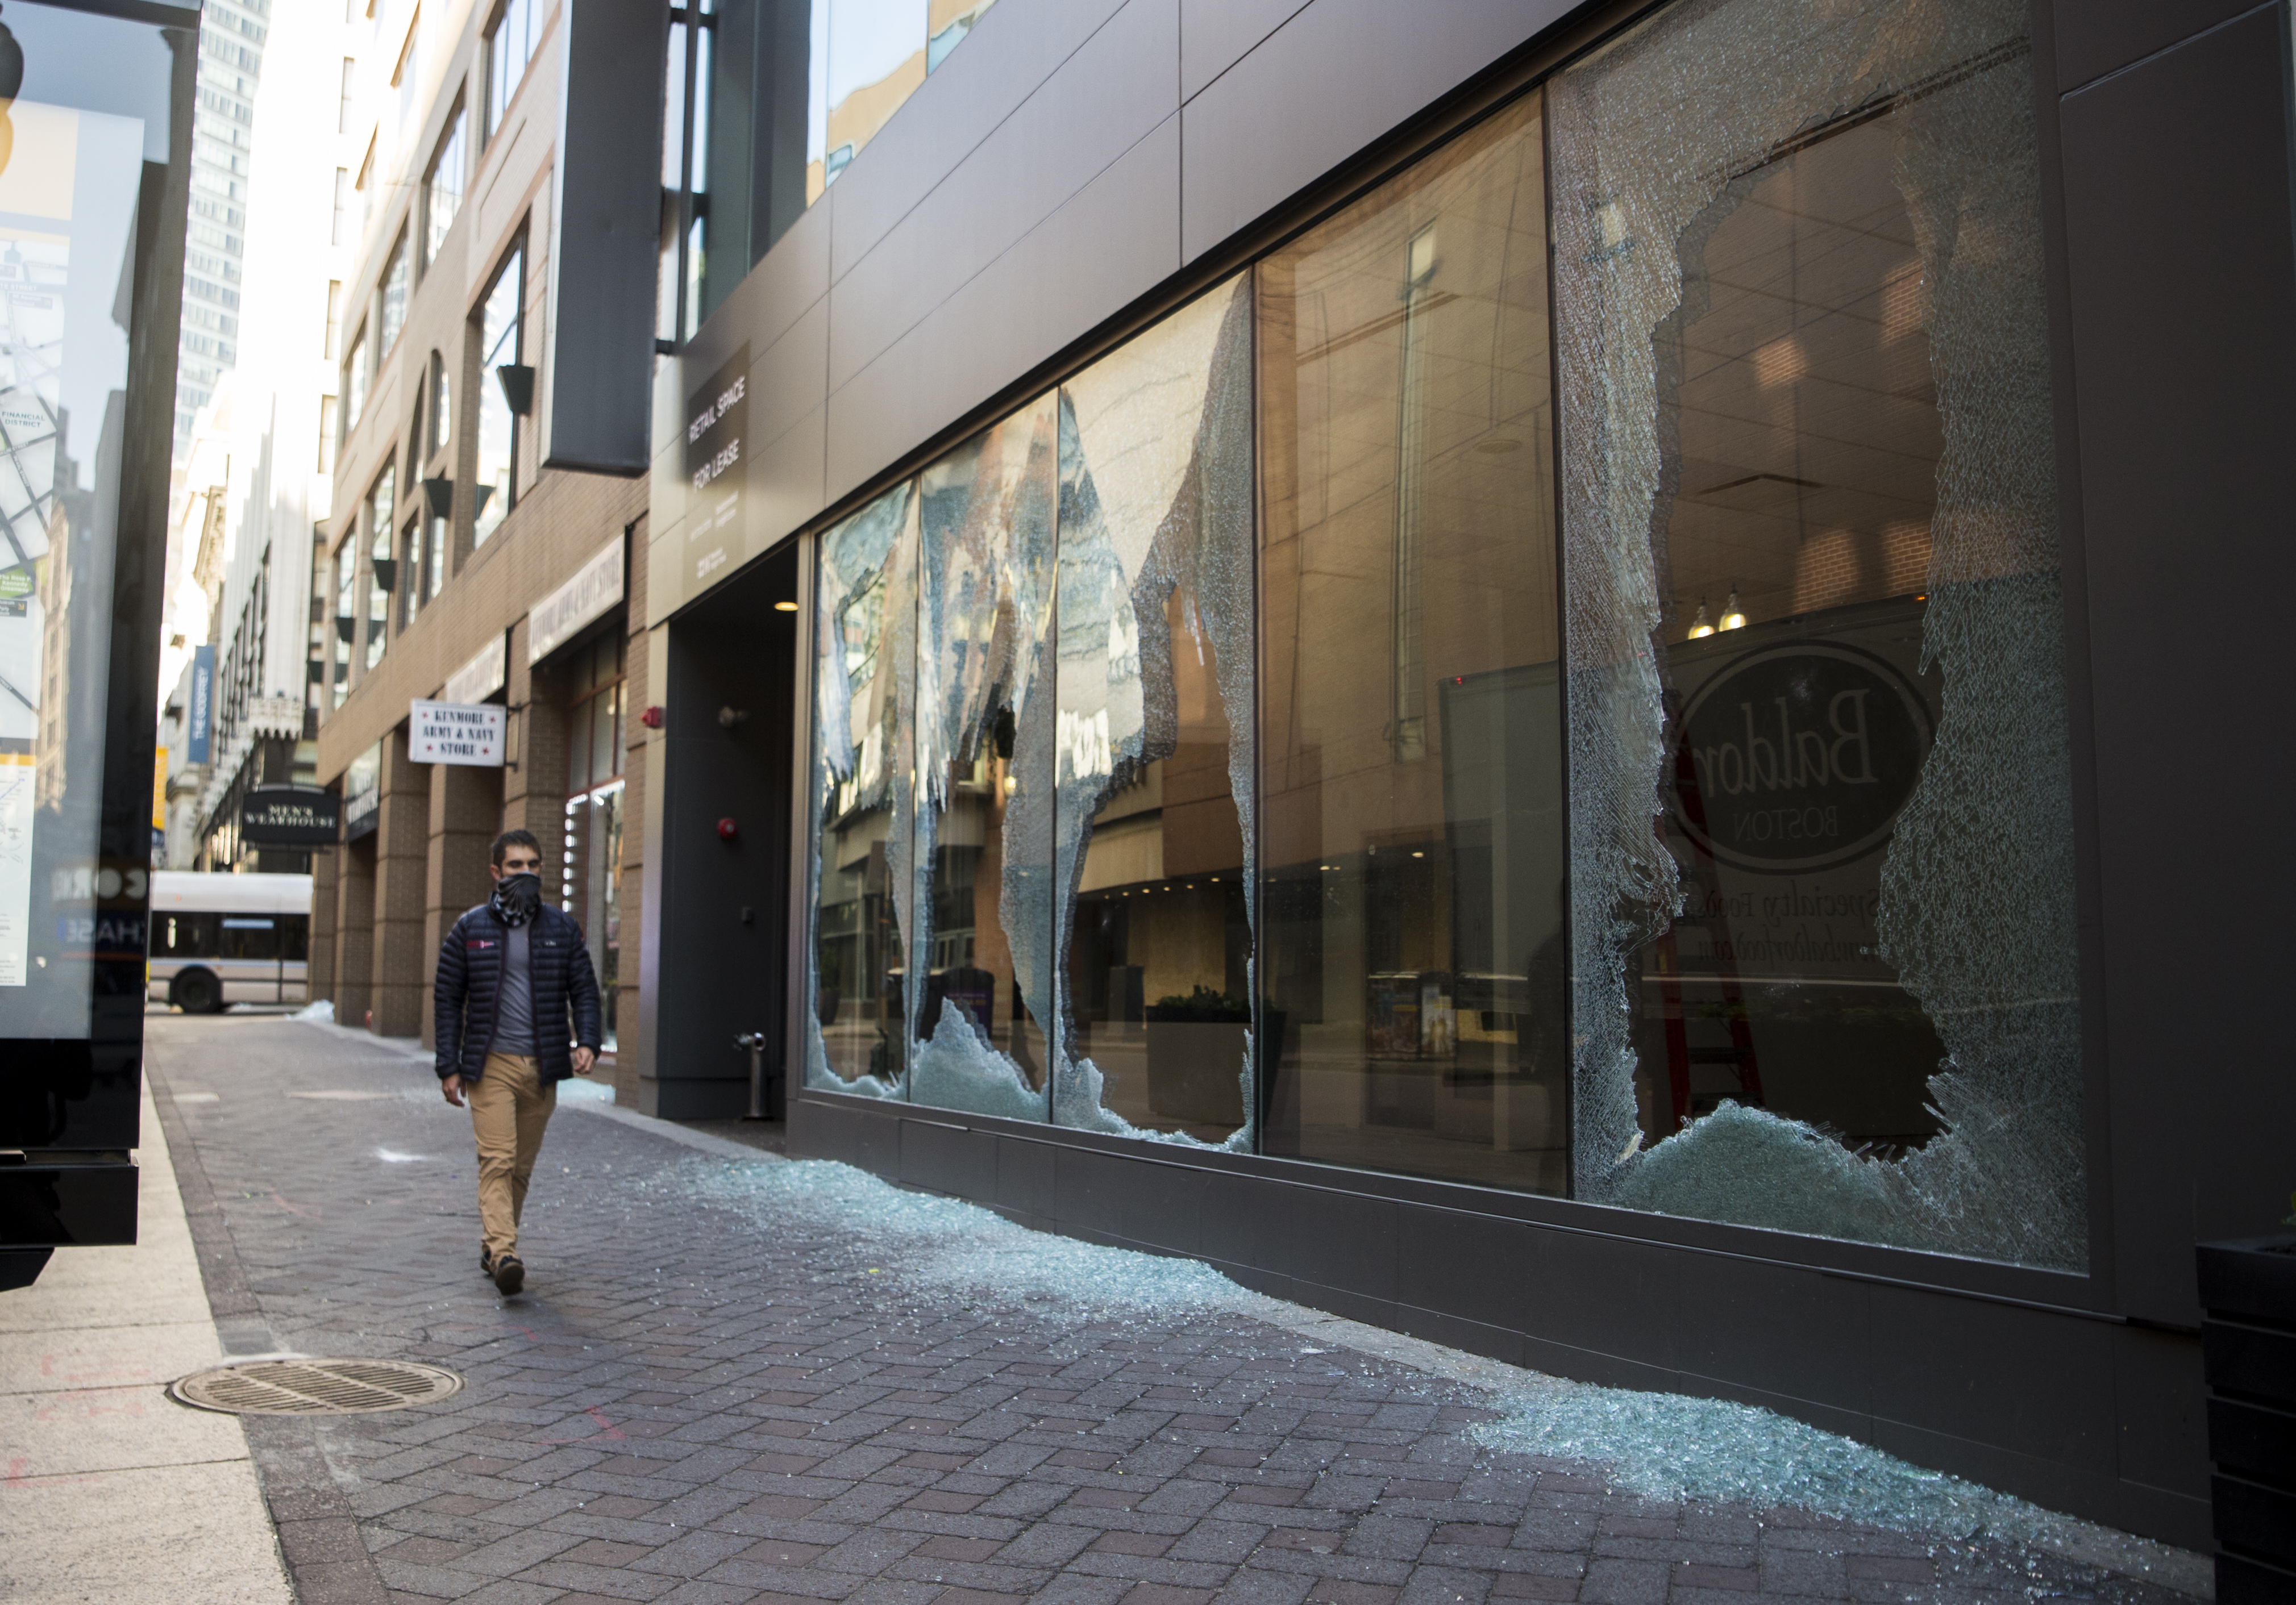 Gang Of Thieves Swarms Louis Vuitton Store, Swipes $100,000+ In Handbags